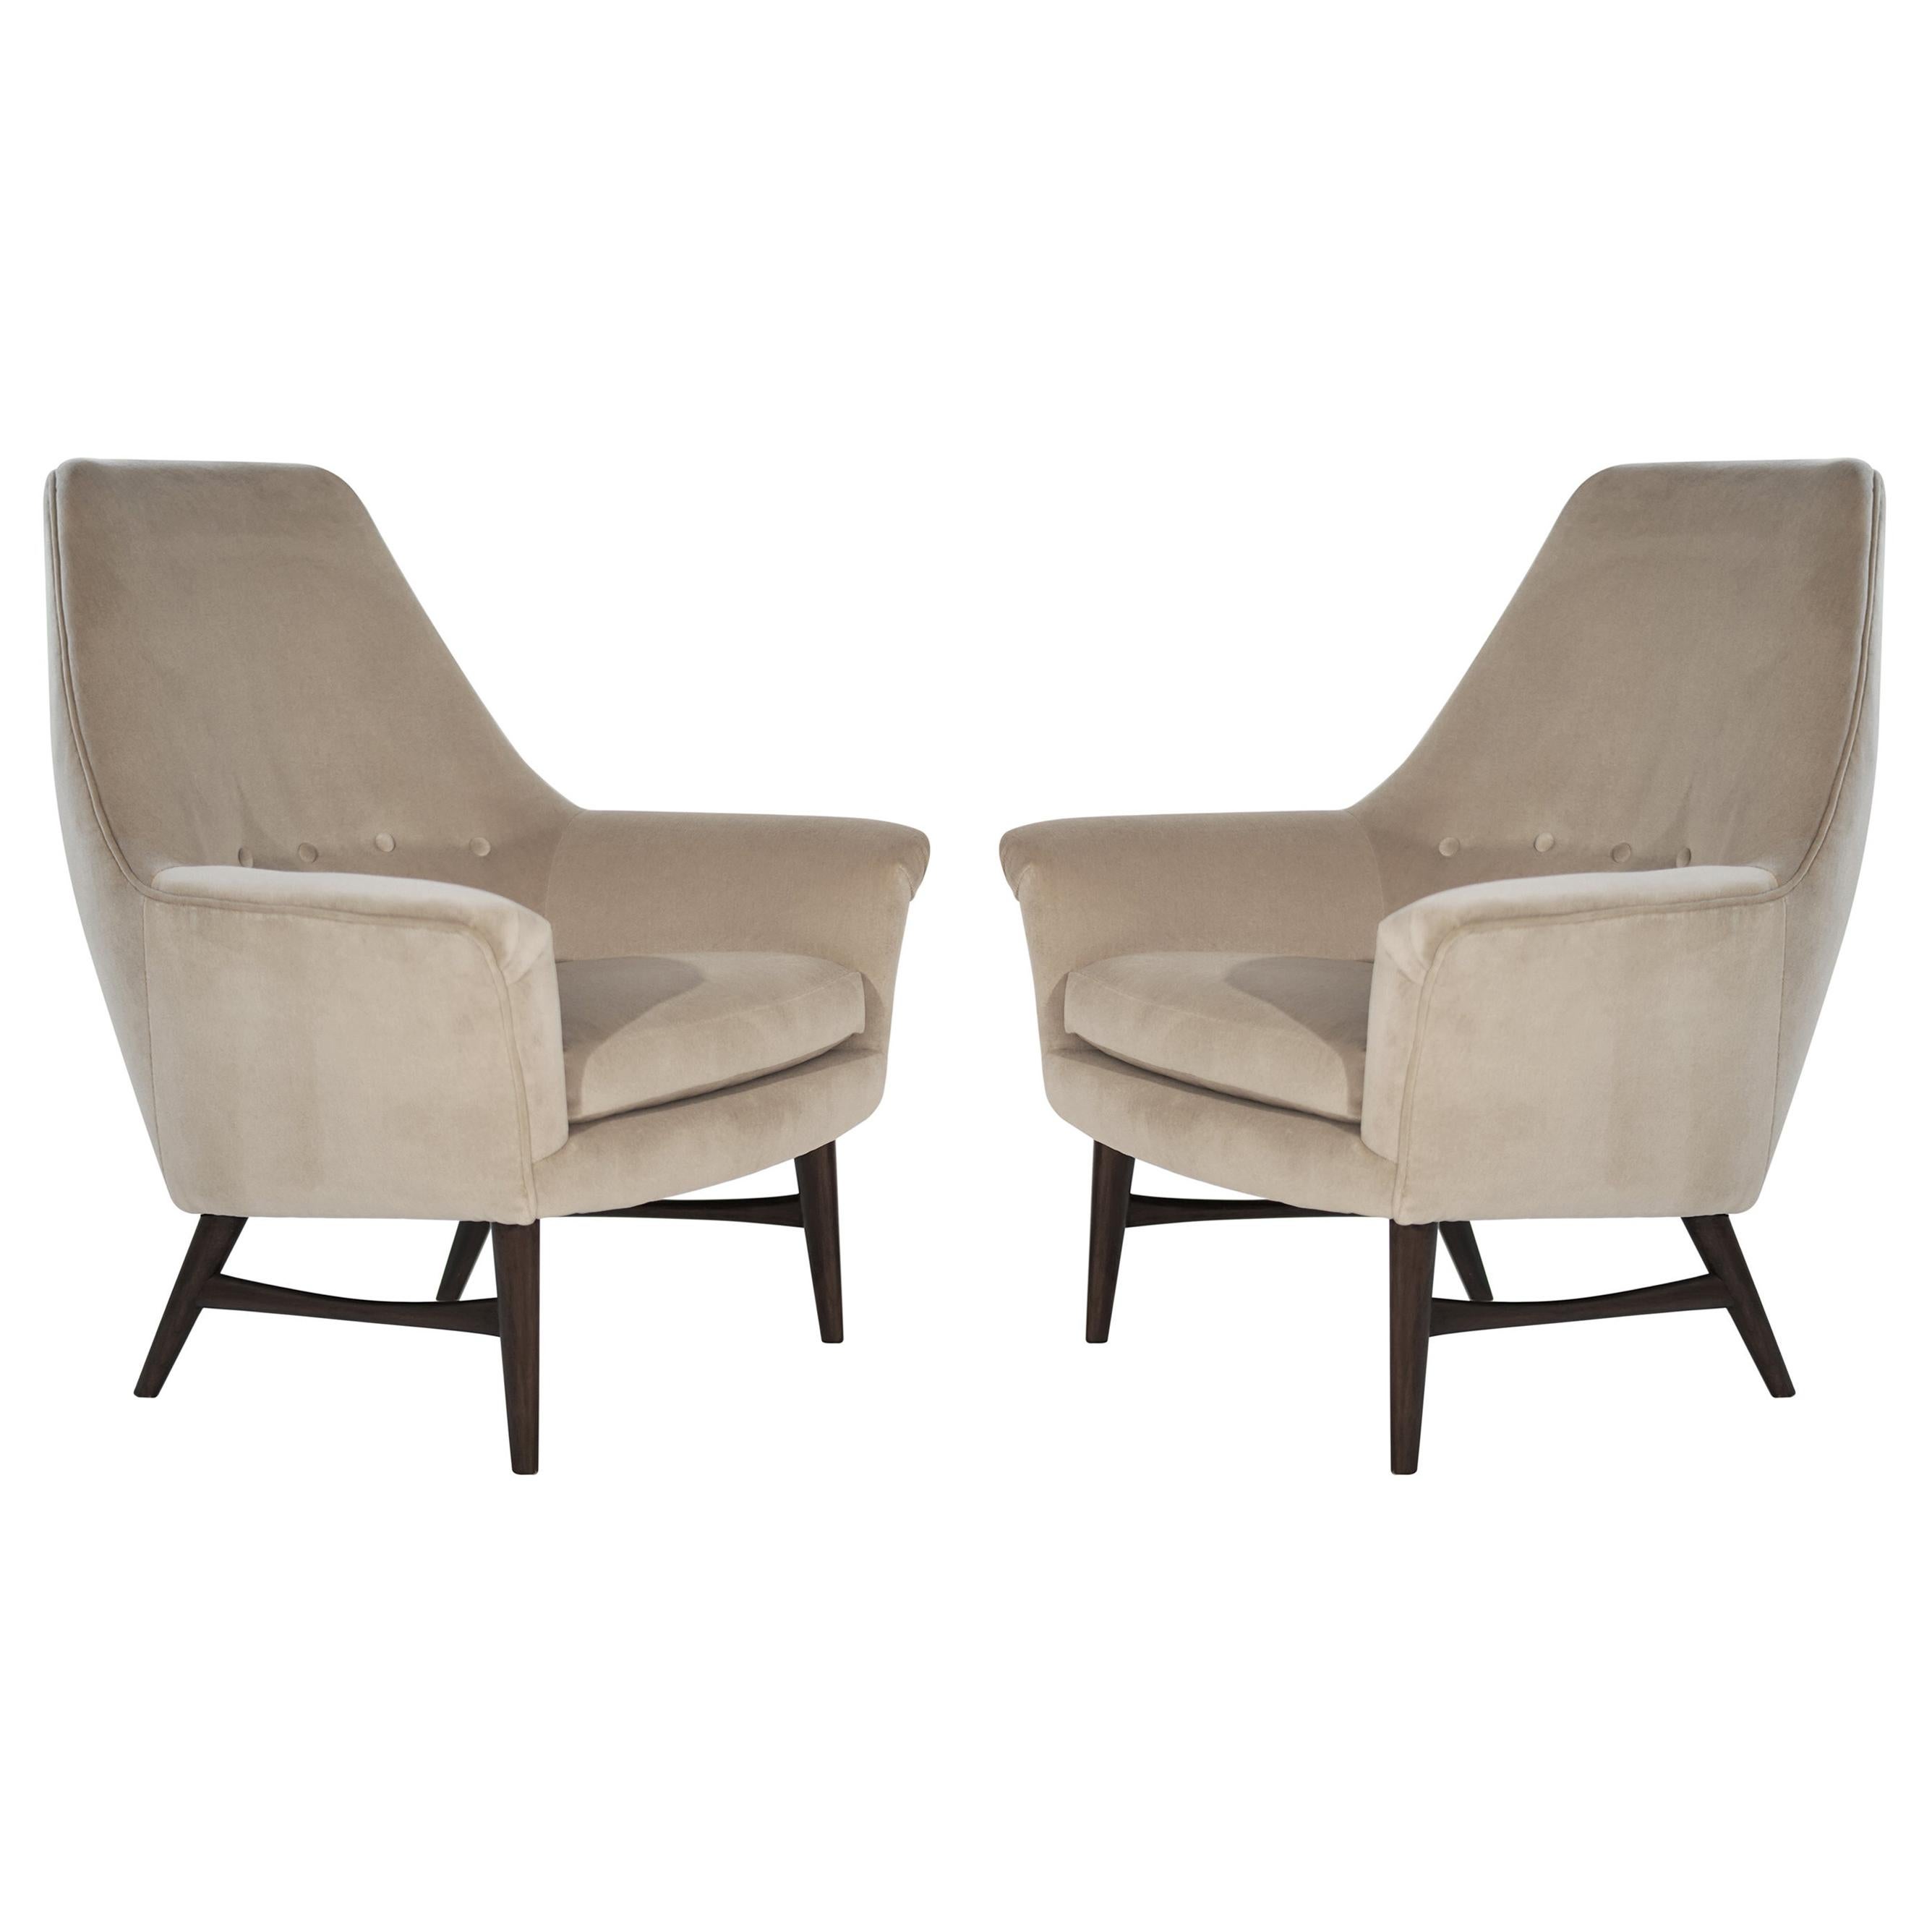 High-Back Lounge Chairs by Oscar Langlo in Alpaca Velvet, Norway, 1950s